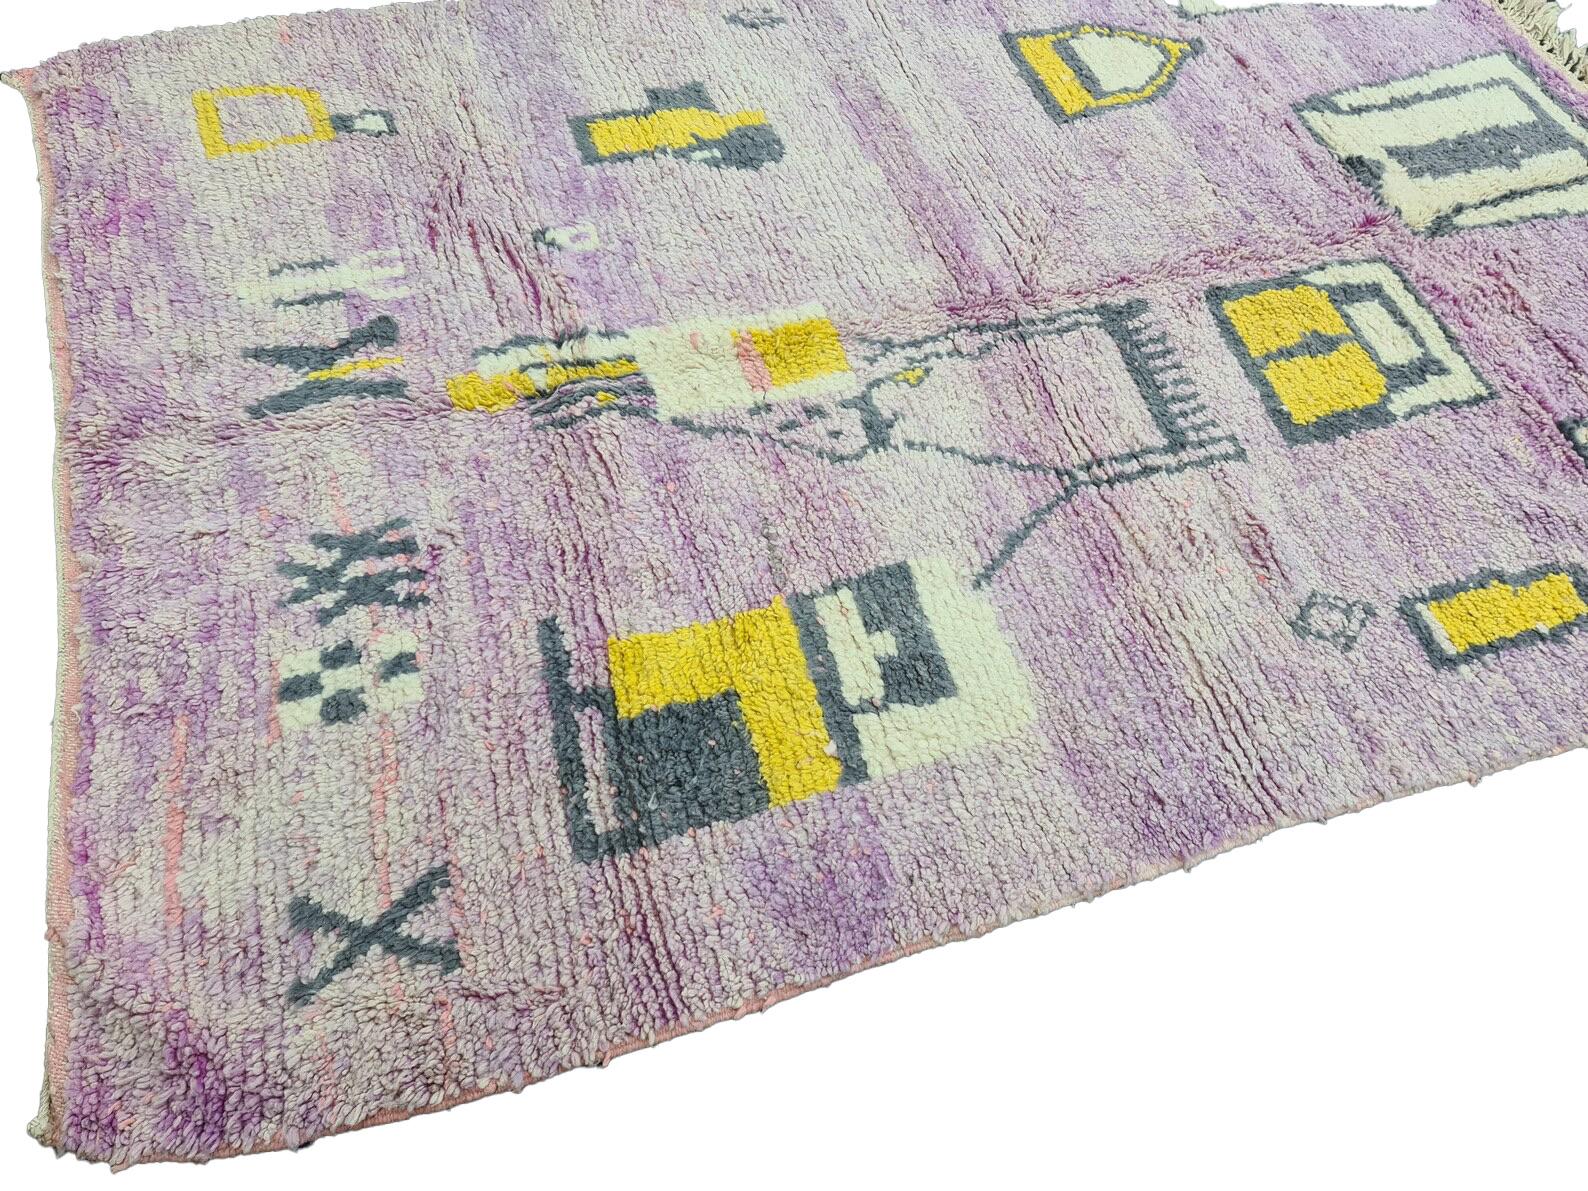 Moroccan Boujaad Rug in Soft Purple and Irregular Geometric Patterns In Excellent Condition For Sale In Los Angeles, CA